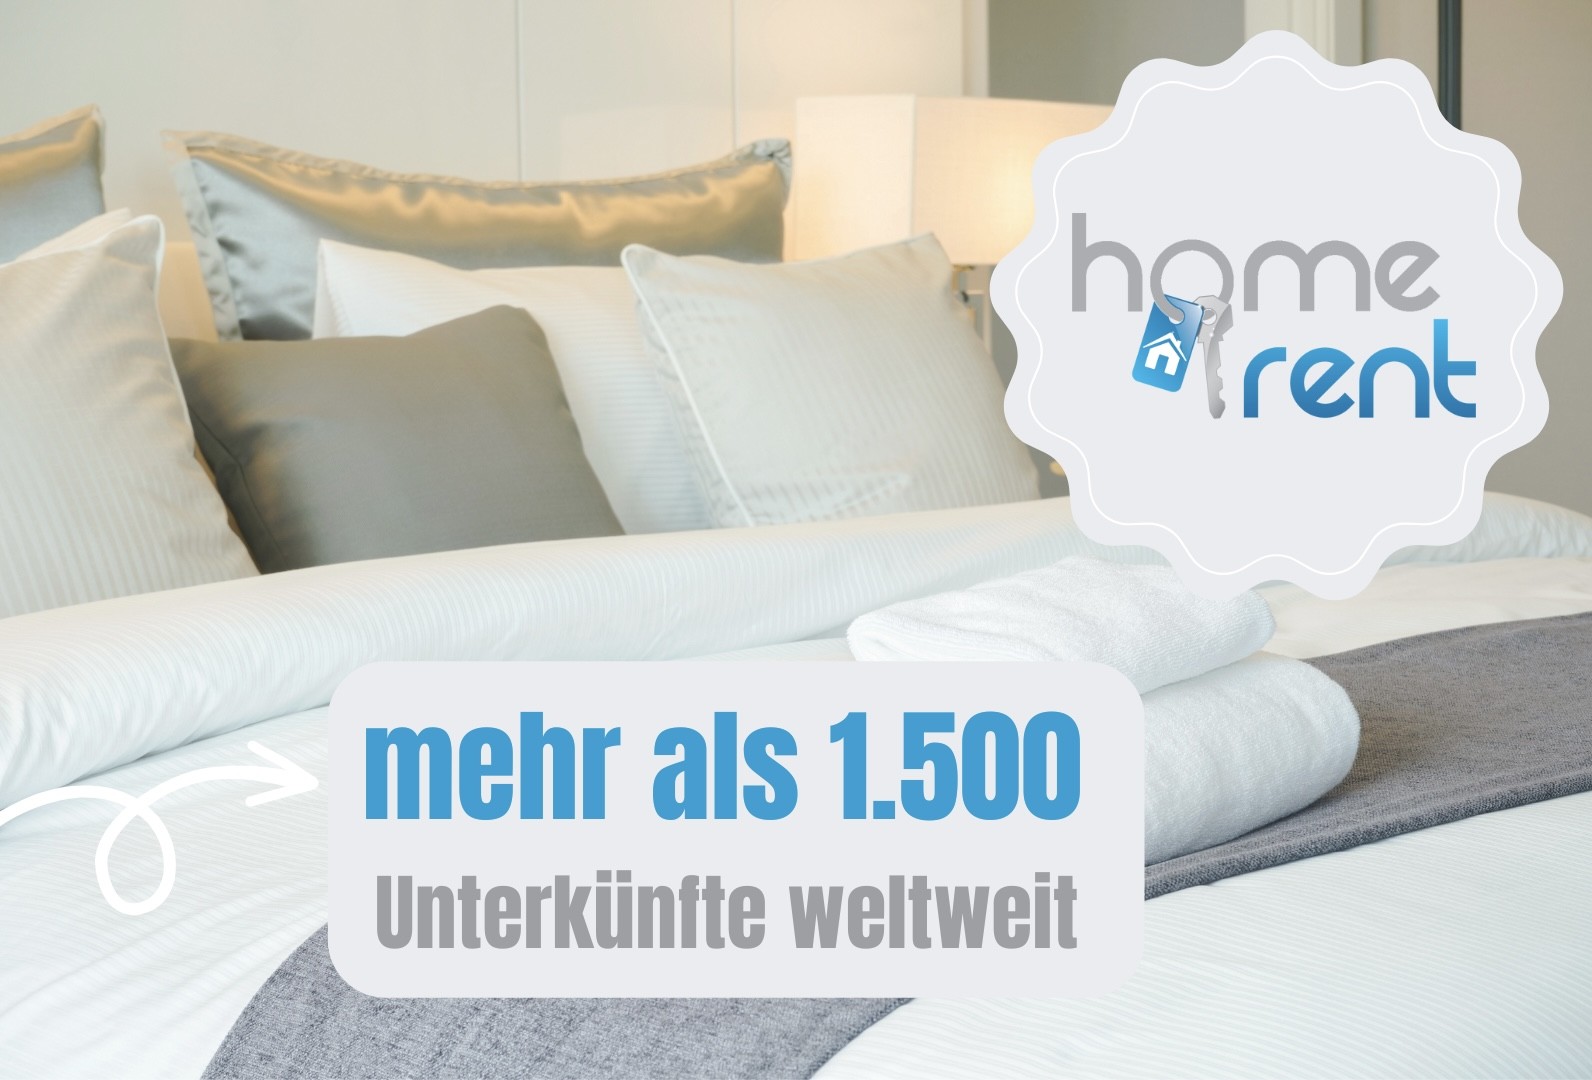 Ferienwohnung HomeRent in Wesseling & Umgebung Homerent Immobilien GmbH 50389 169163968564d45f8526c2a